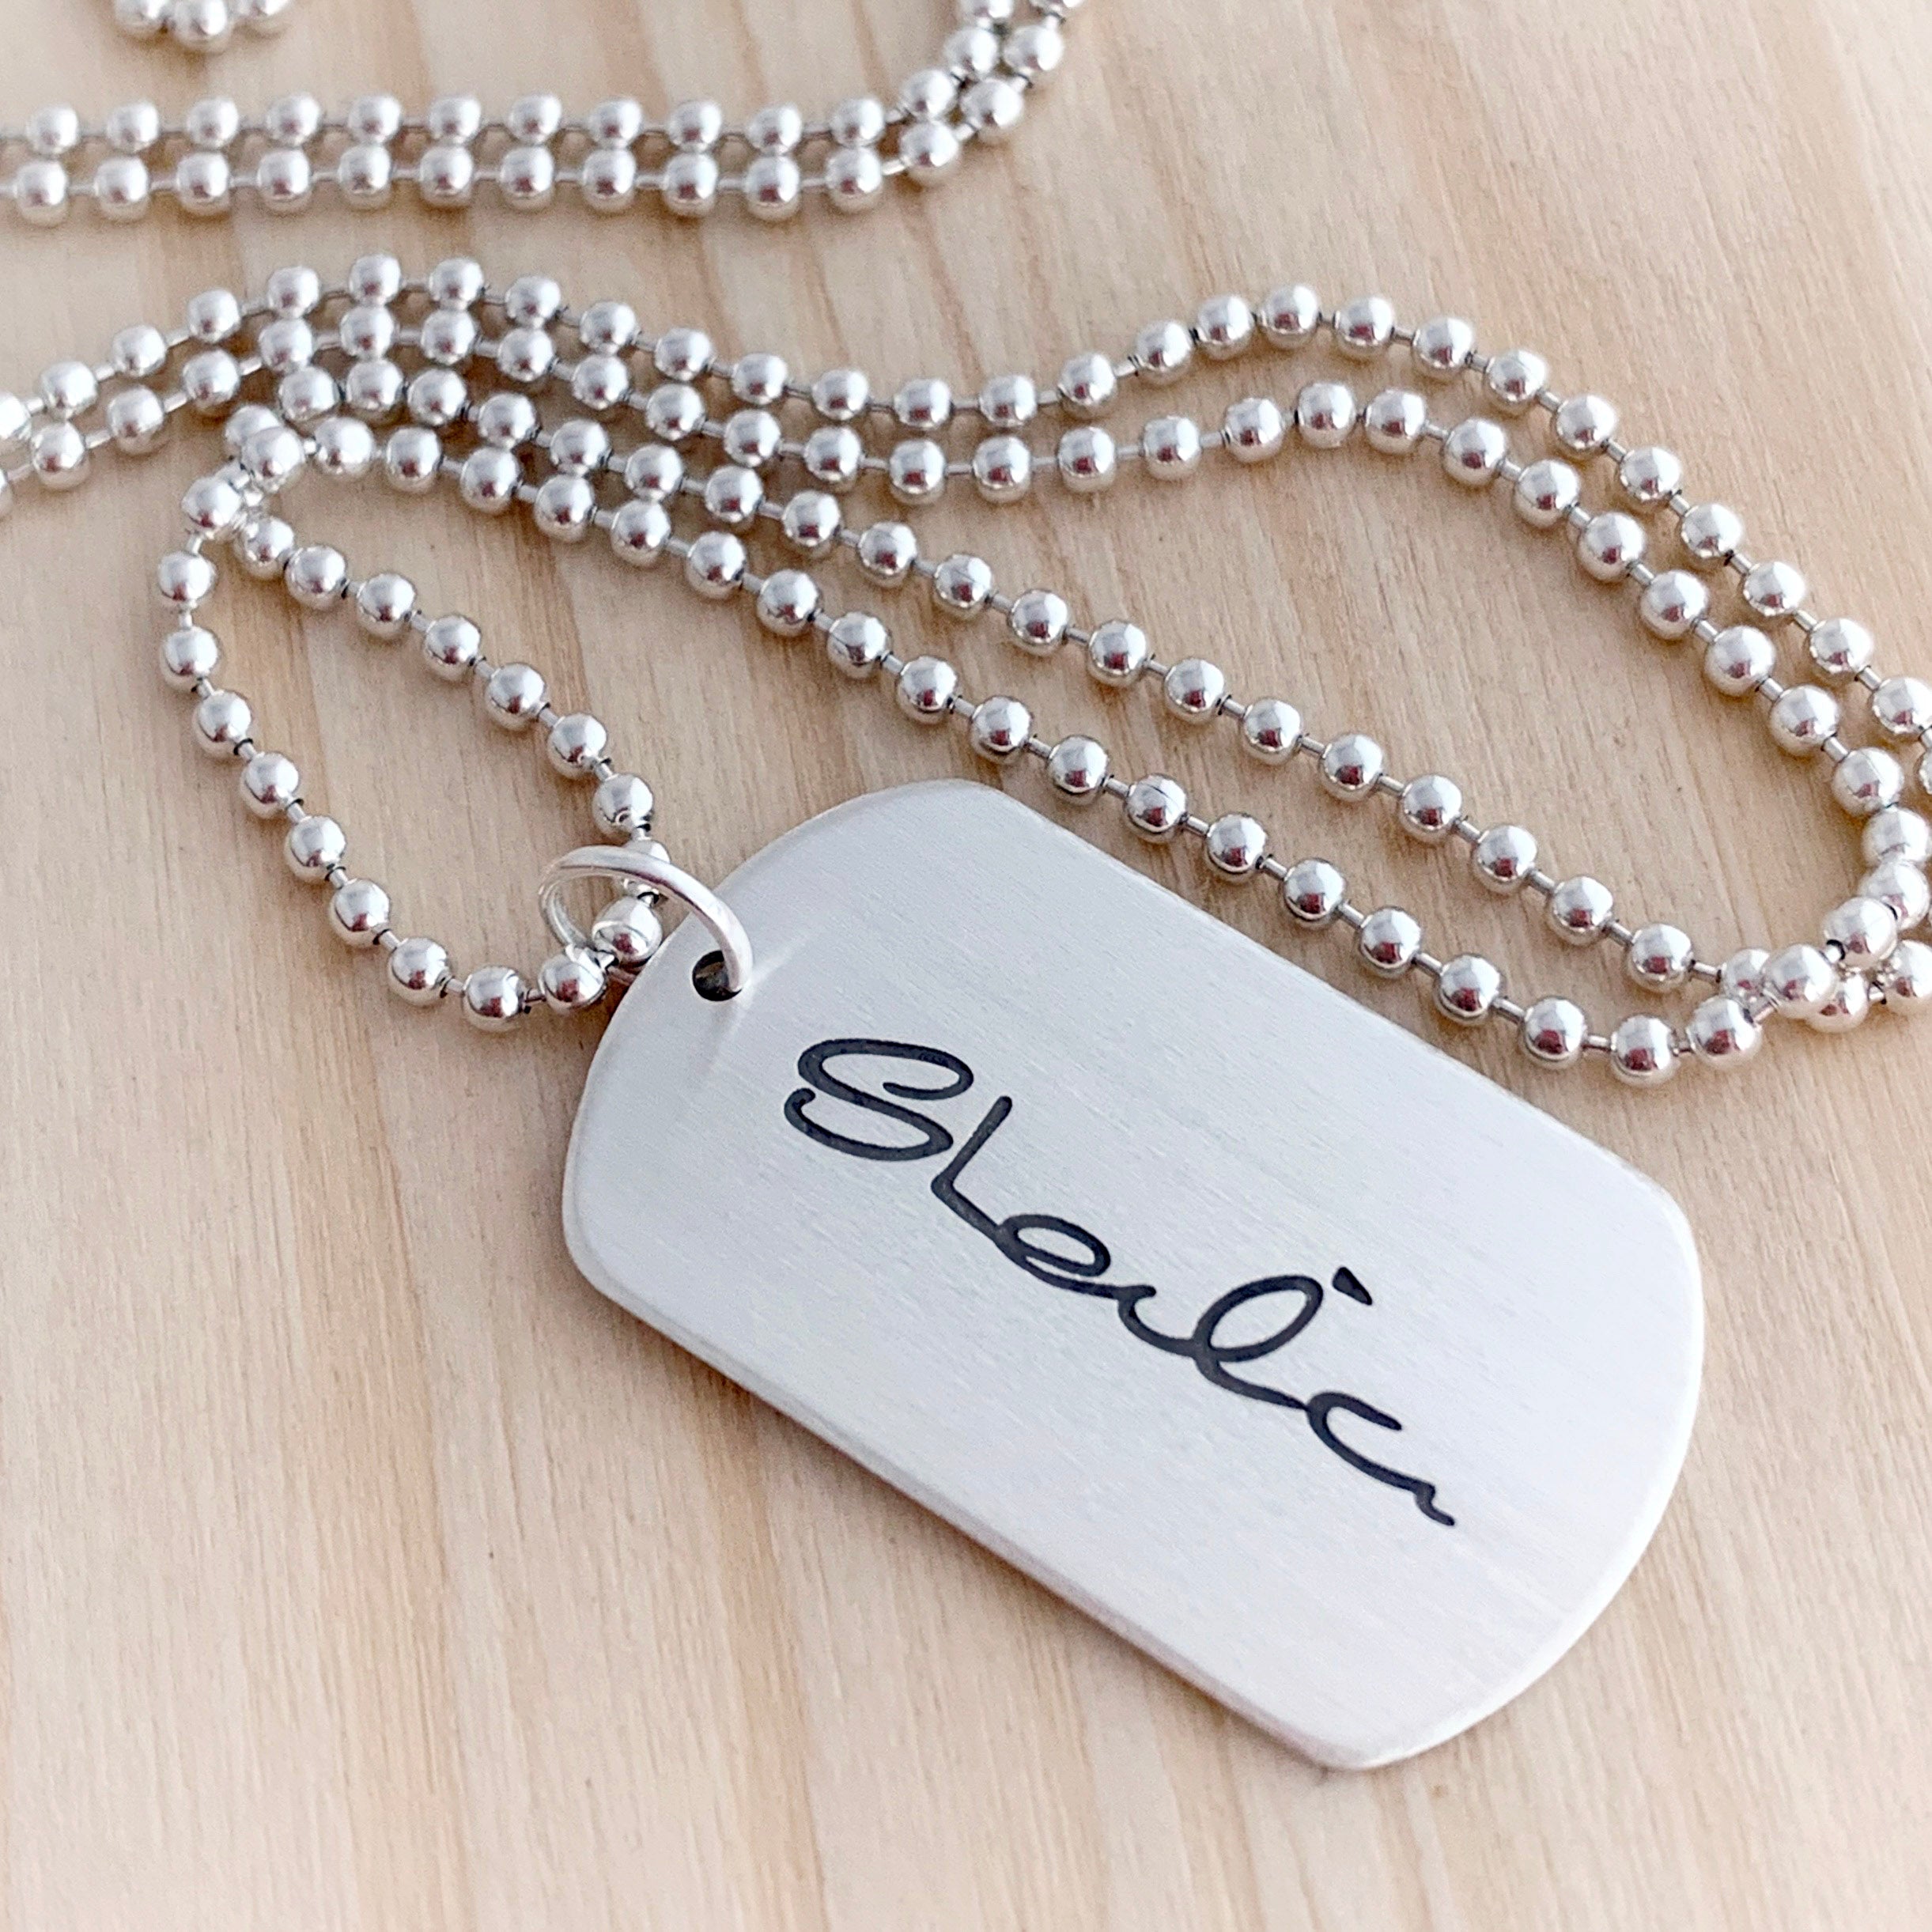 Jane Necklace | Engraved Mini Dog Tag | Scripted Jewelry